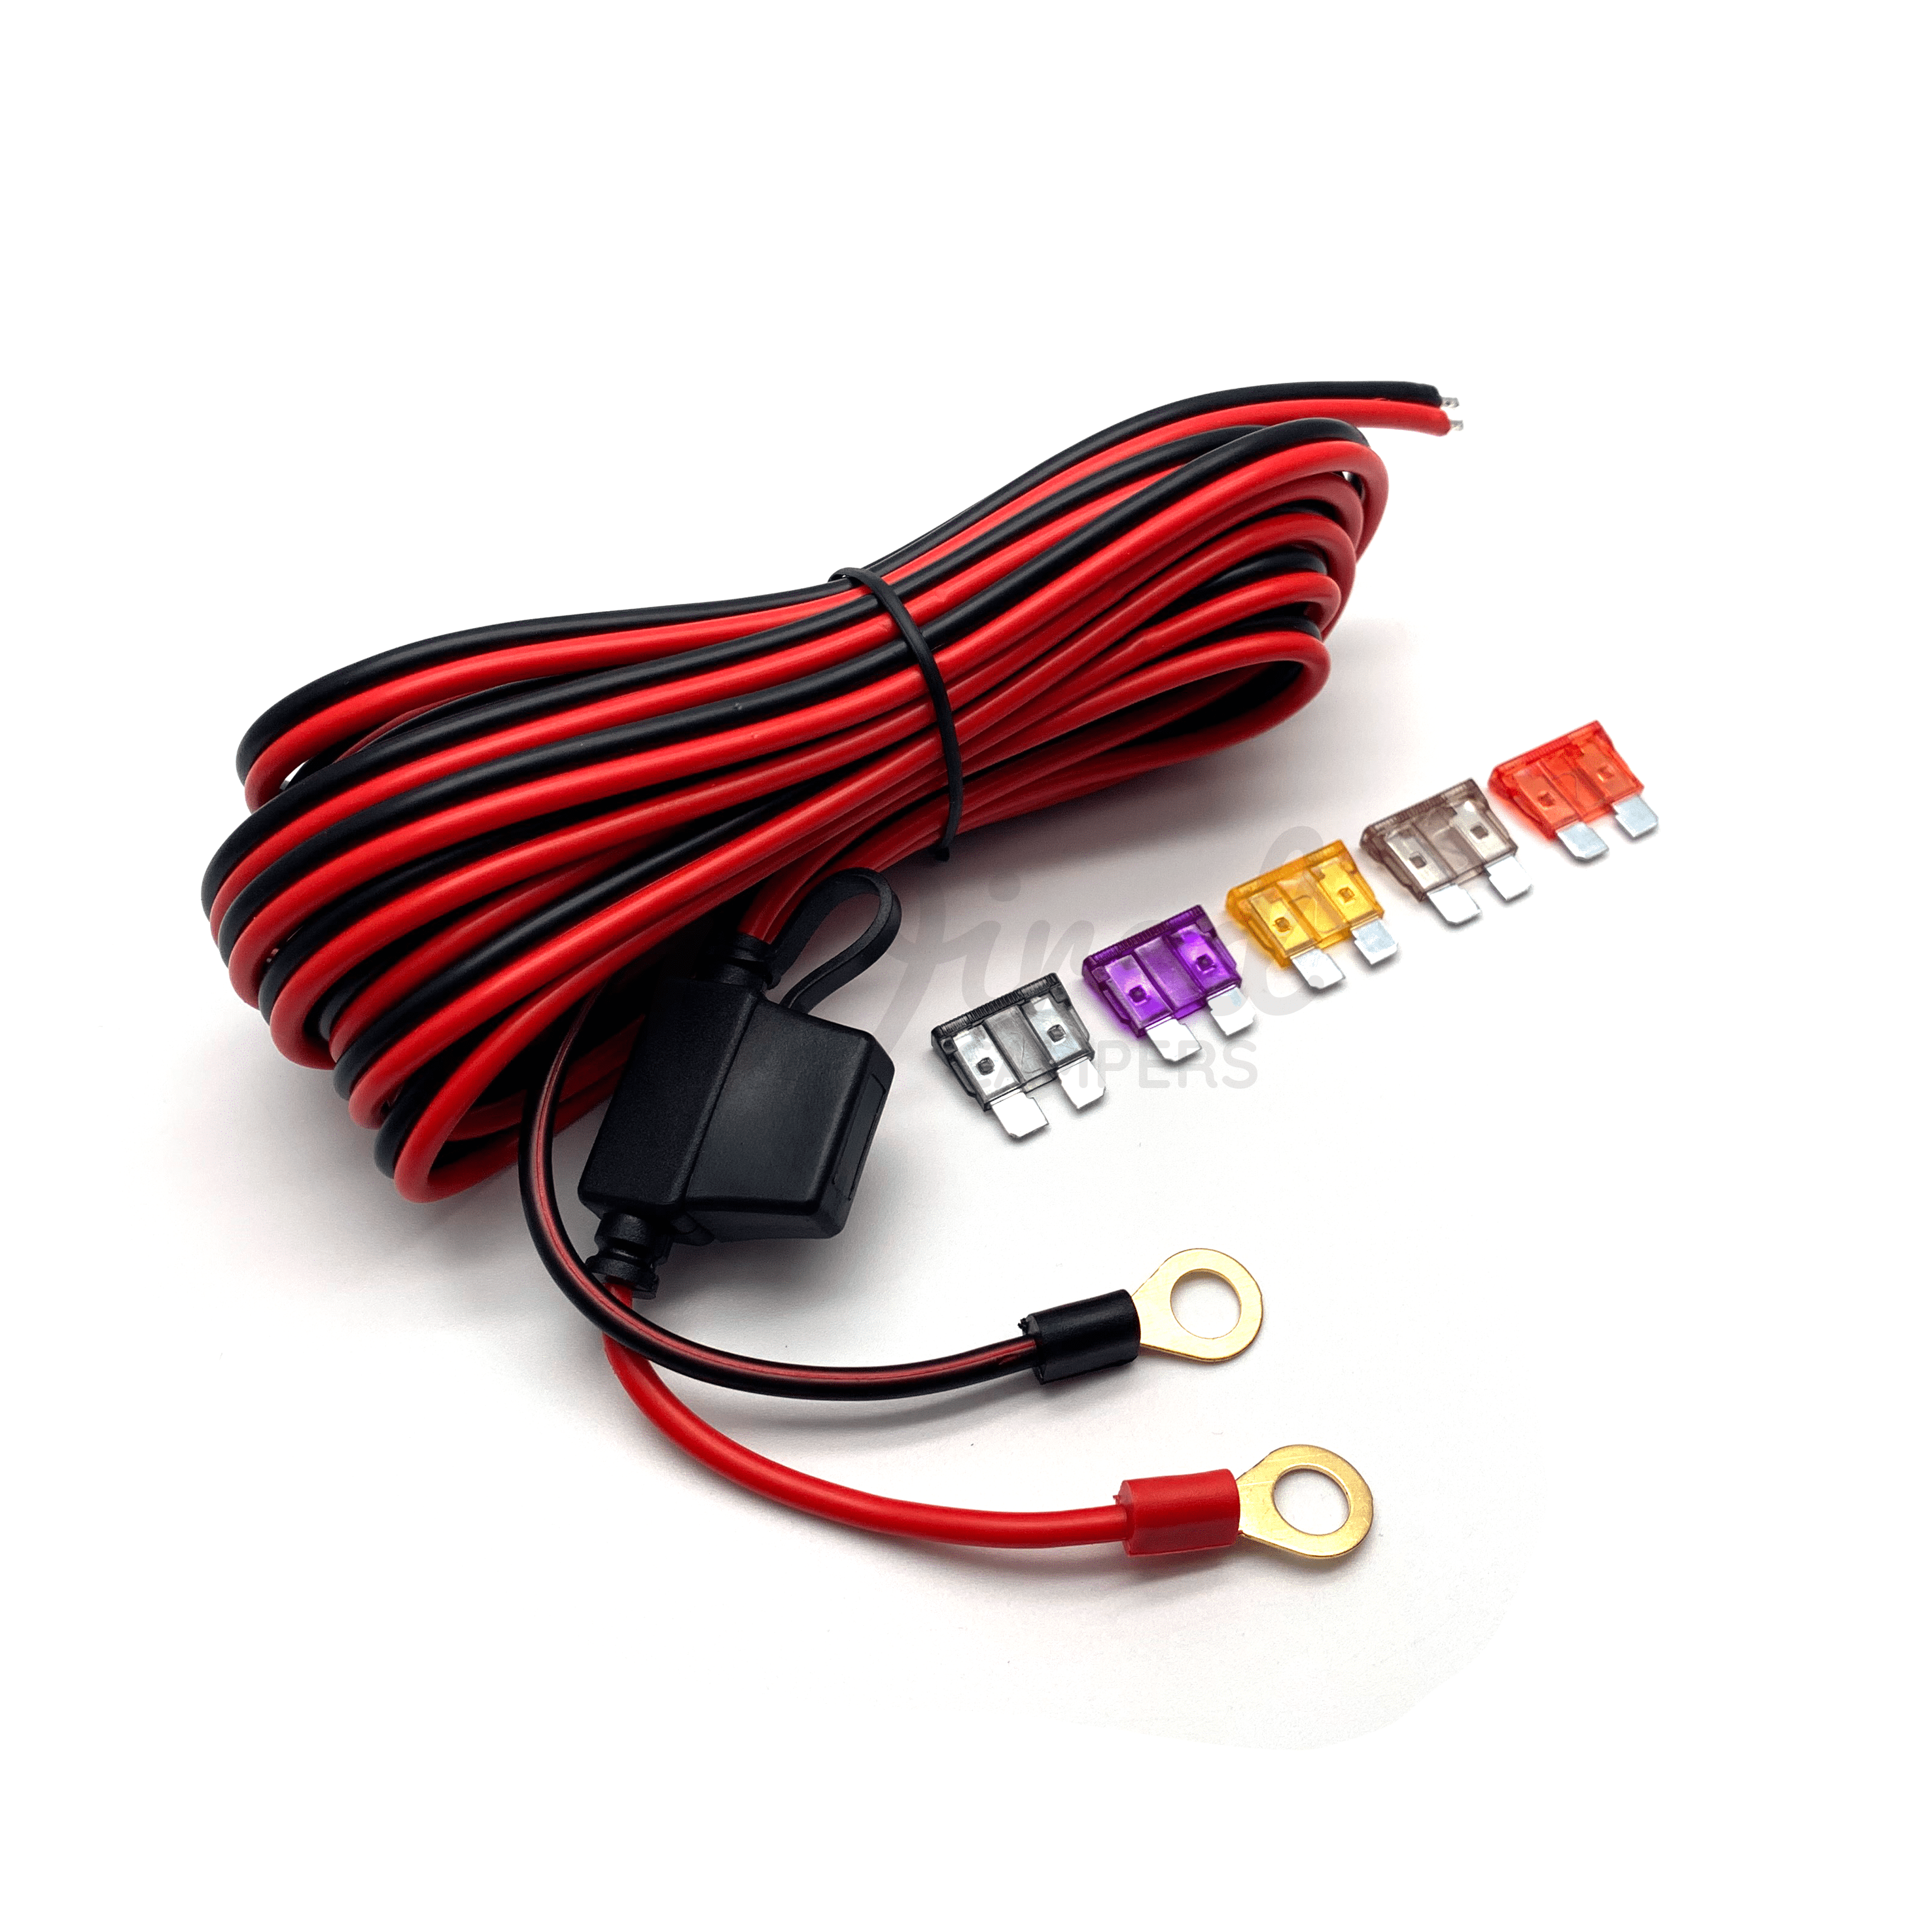 Wired Campers Limited 5M Fused Easy Lead - 2A/3A/5A/7.5A/10A - 12V Accessory Power Cable With Ring Terminals